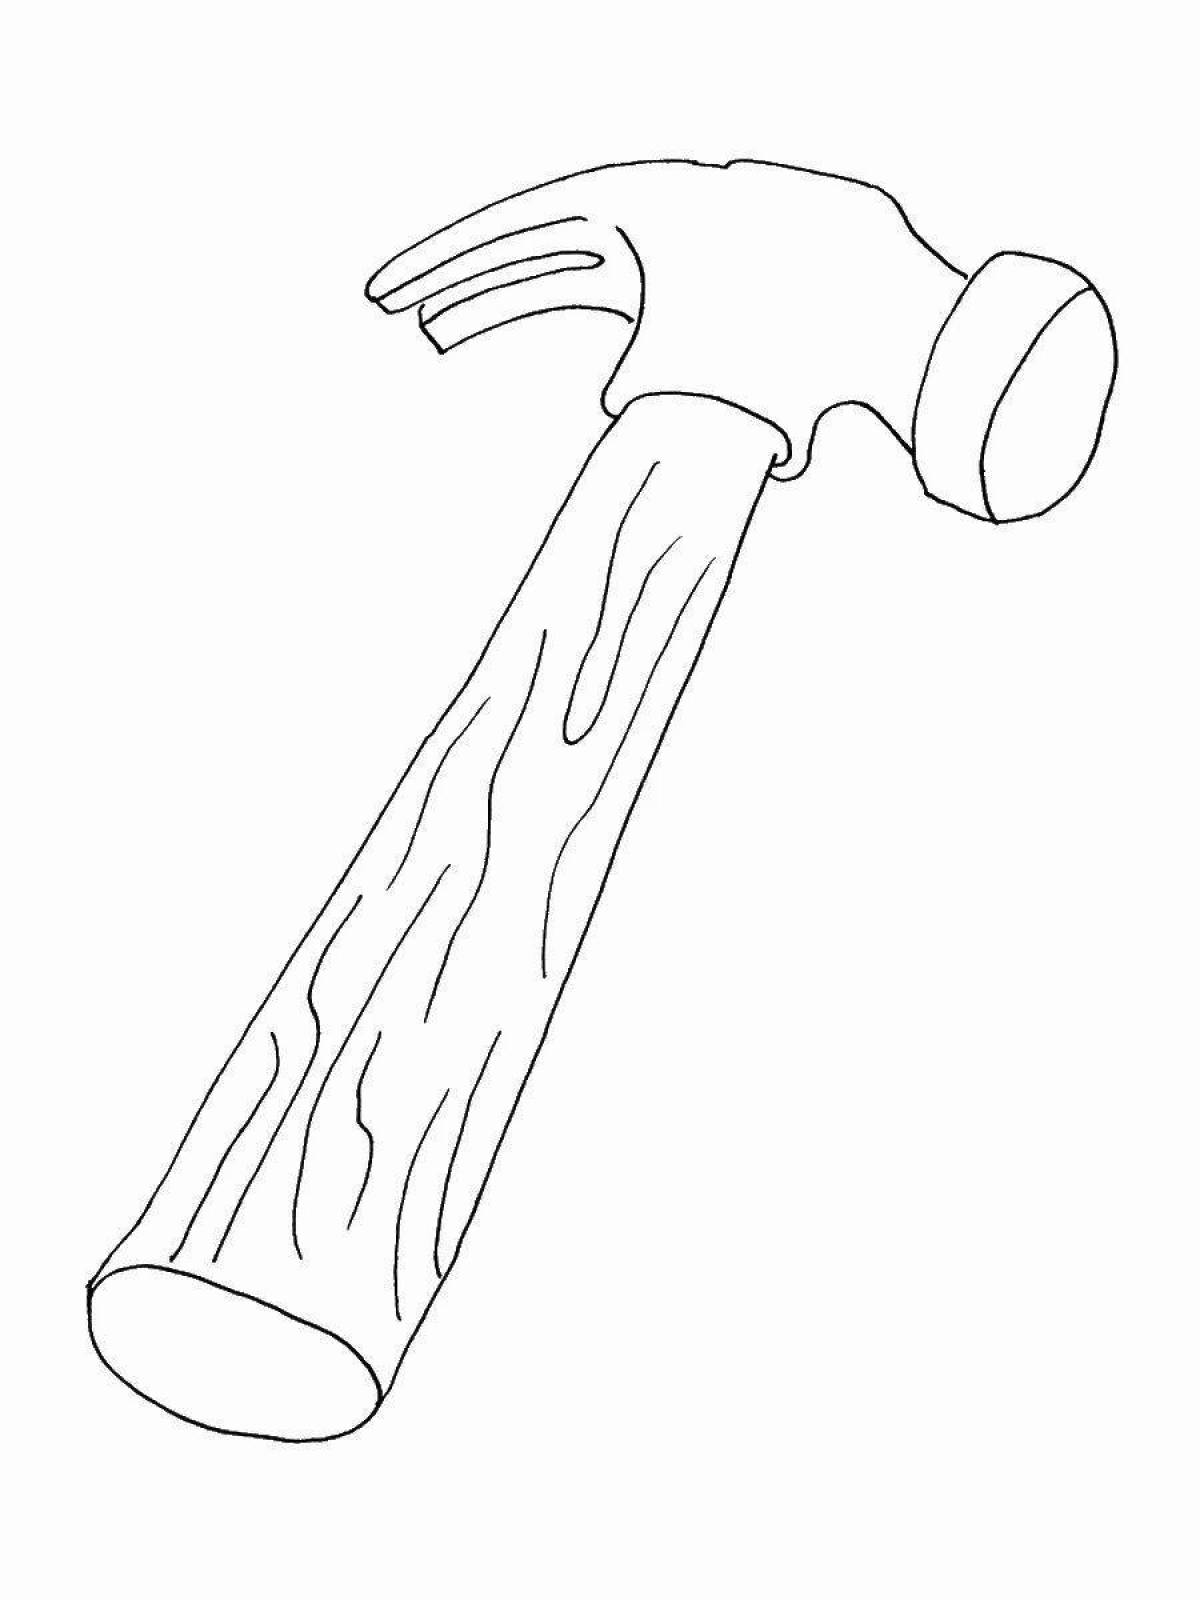 Adorable hammer coloring book for kids